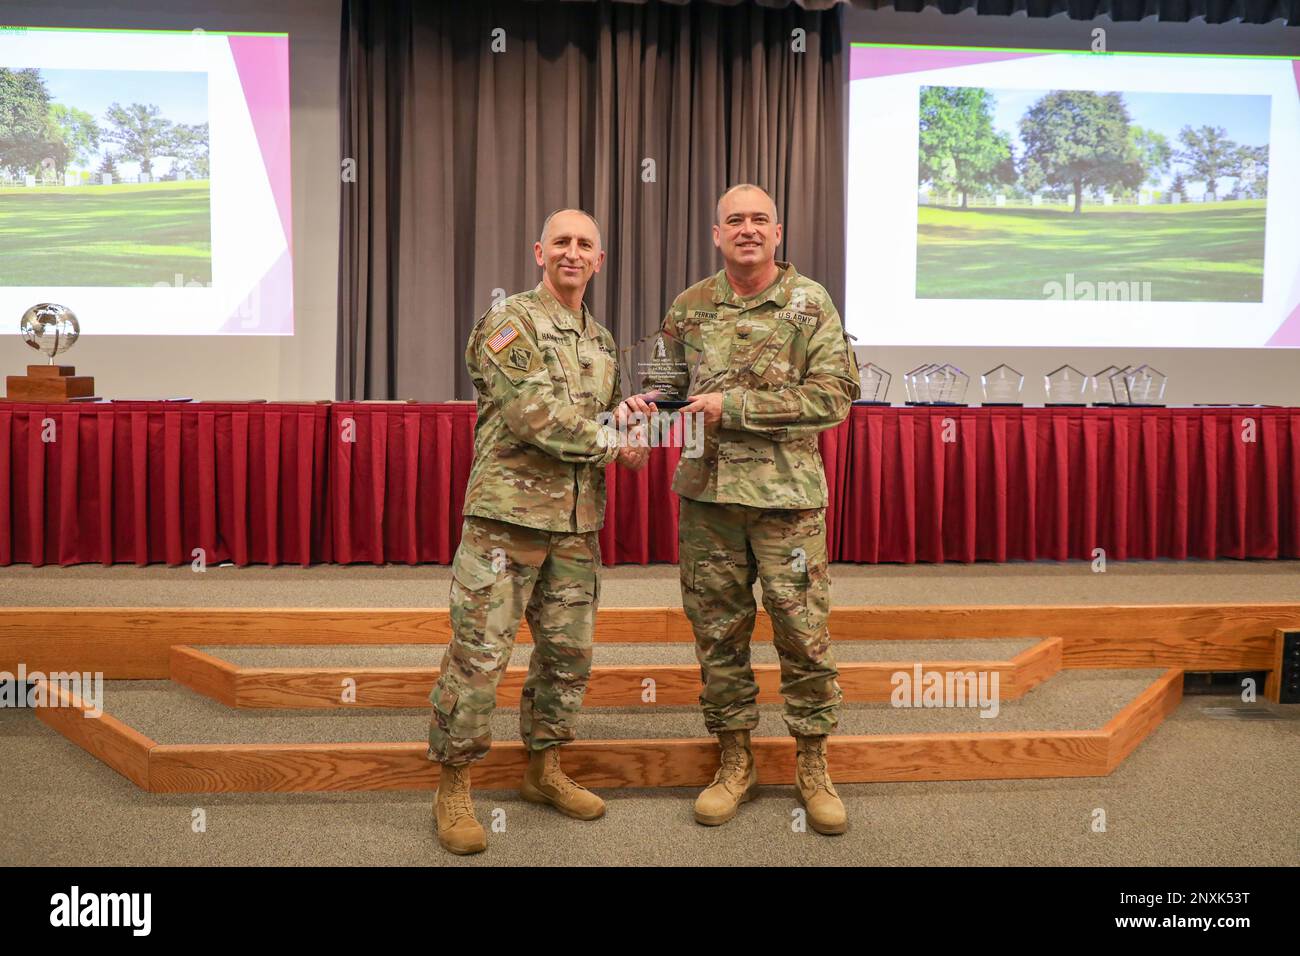 Col. Anthony Hammett, the Army National Guard’s chief of installations, environment and energy, presents the Department of the Army 2021 Cultural Resources Management award (small installation category) to Col. John Perkins, director of the Iowa National Guard Construction and Facilities Management Office, during an awards ceremony at the Professional Education Center at Camp Robinson in North Little Rock, Arkansas, Jan. 24, 2023. The Iowa National Guard CFMO received the national award for its restoration of the historic limestone fence and gatehouse at Camp Dodge in Johnston, Iowa. The award Stock Photo